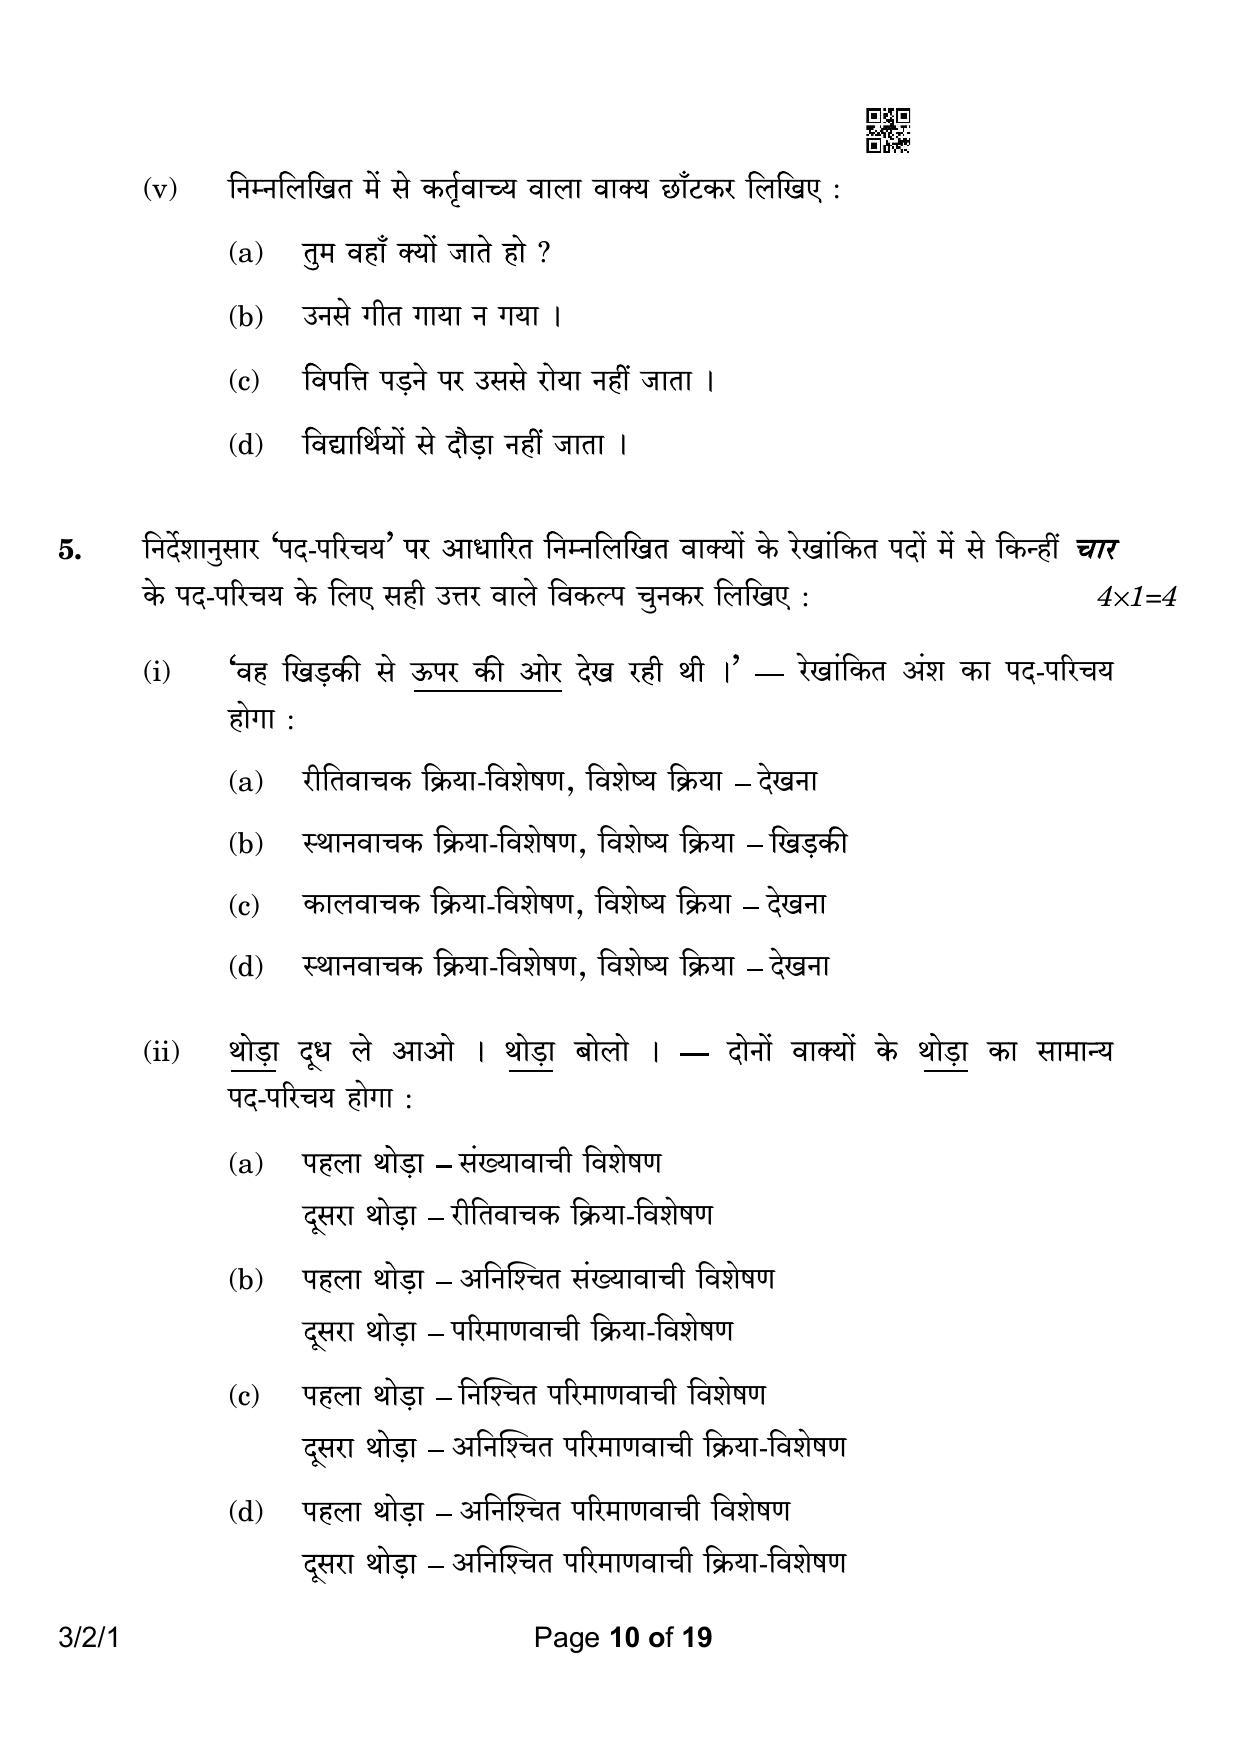 CBSE Class 10 3-2-1 Hindi A 2023 Question Paper - Page 10